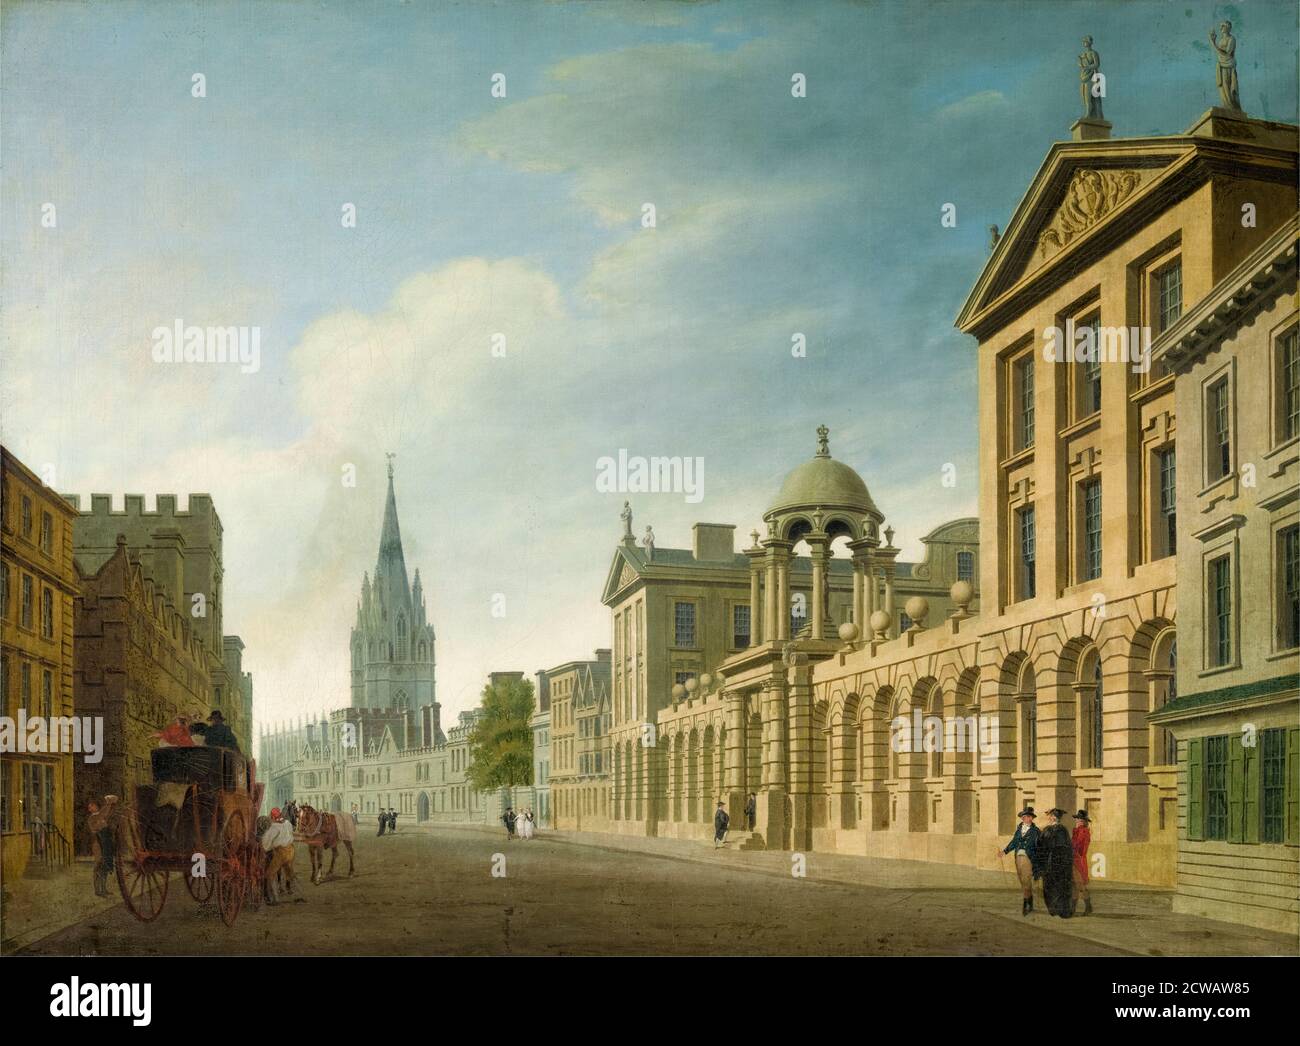 High Street, Oxford, England, landscape painting by Thomas Malton the Younger, 1798-1799 Stock Photo